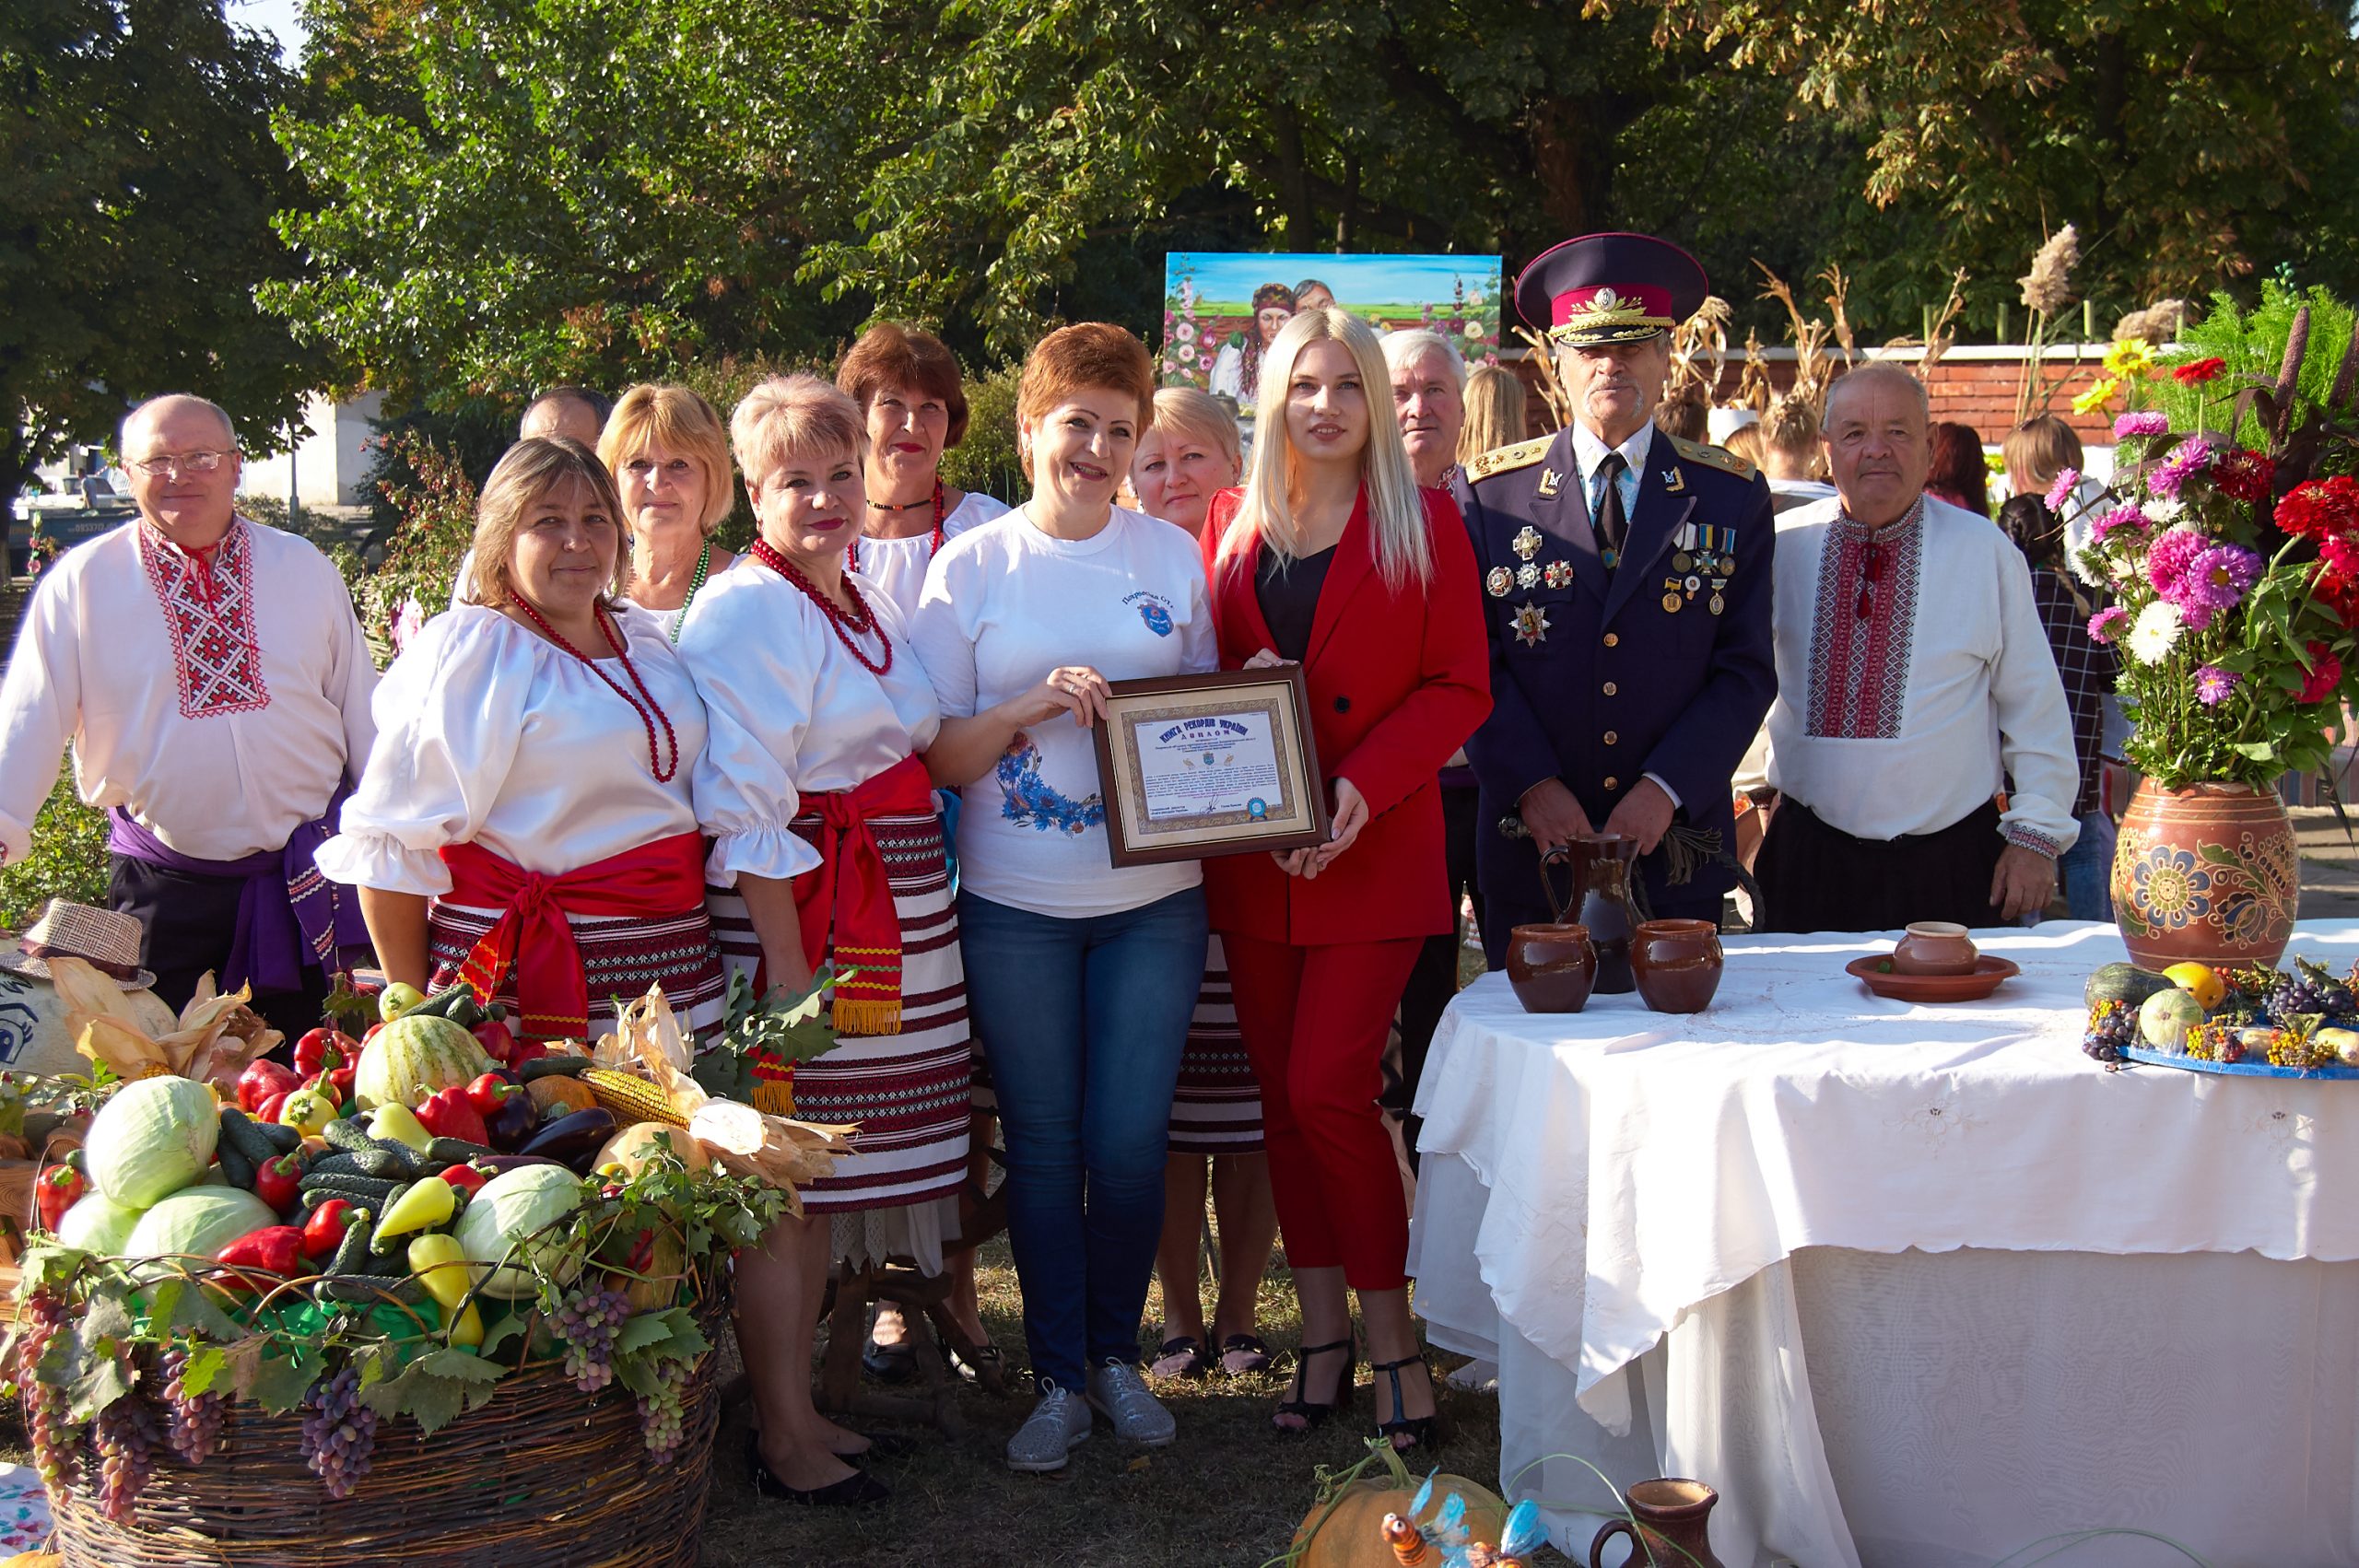 Svitlana Spazheva in the middle (Fest-party festival in a peasant’s house, setting a community record for the longest (150 meters long) mud made of natural materials)